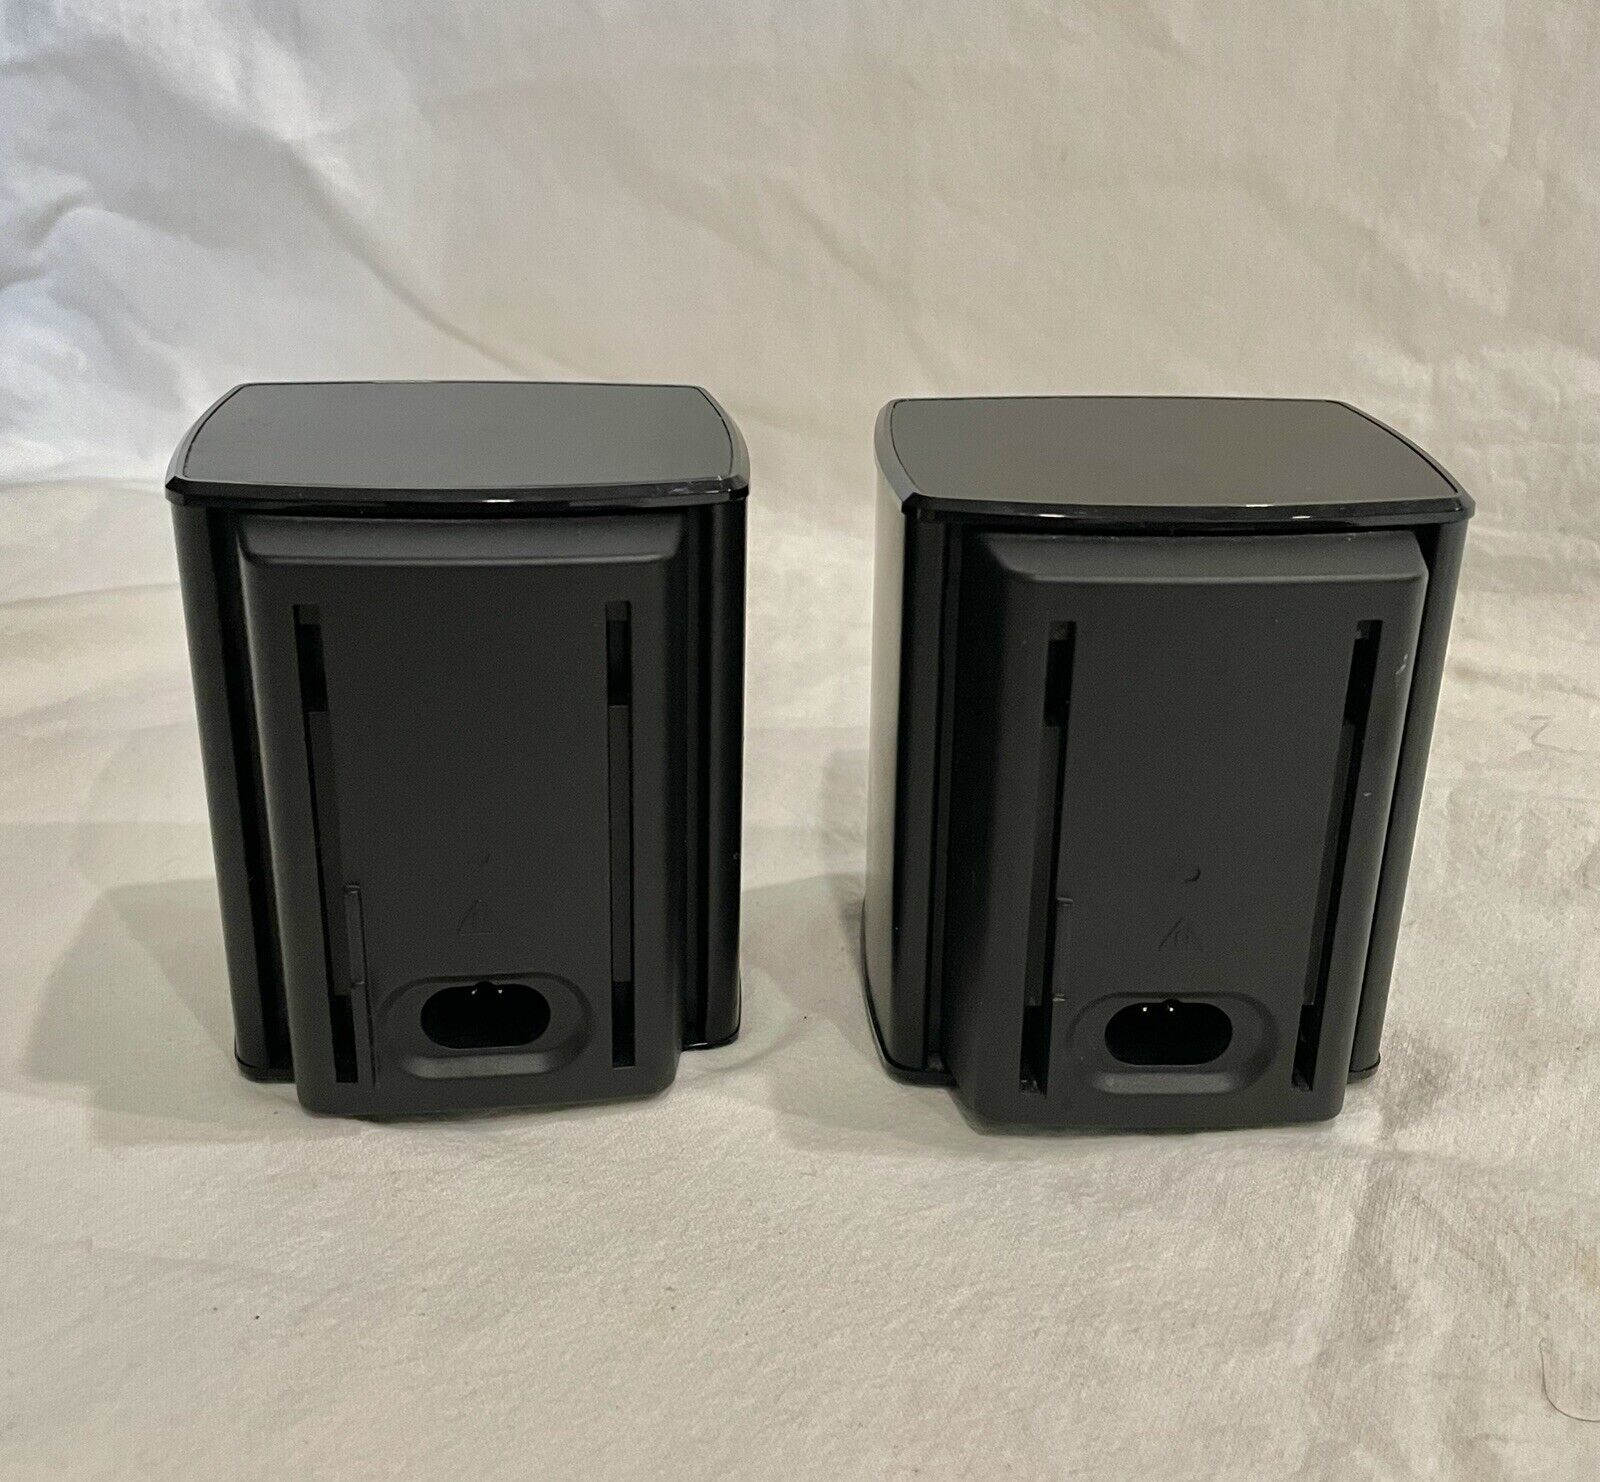 Infecteren Kust tiener Bose Virtually Invisible 300 Surround Speakers only PAIR excellent NO cords  | eBay